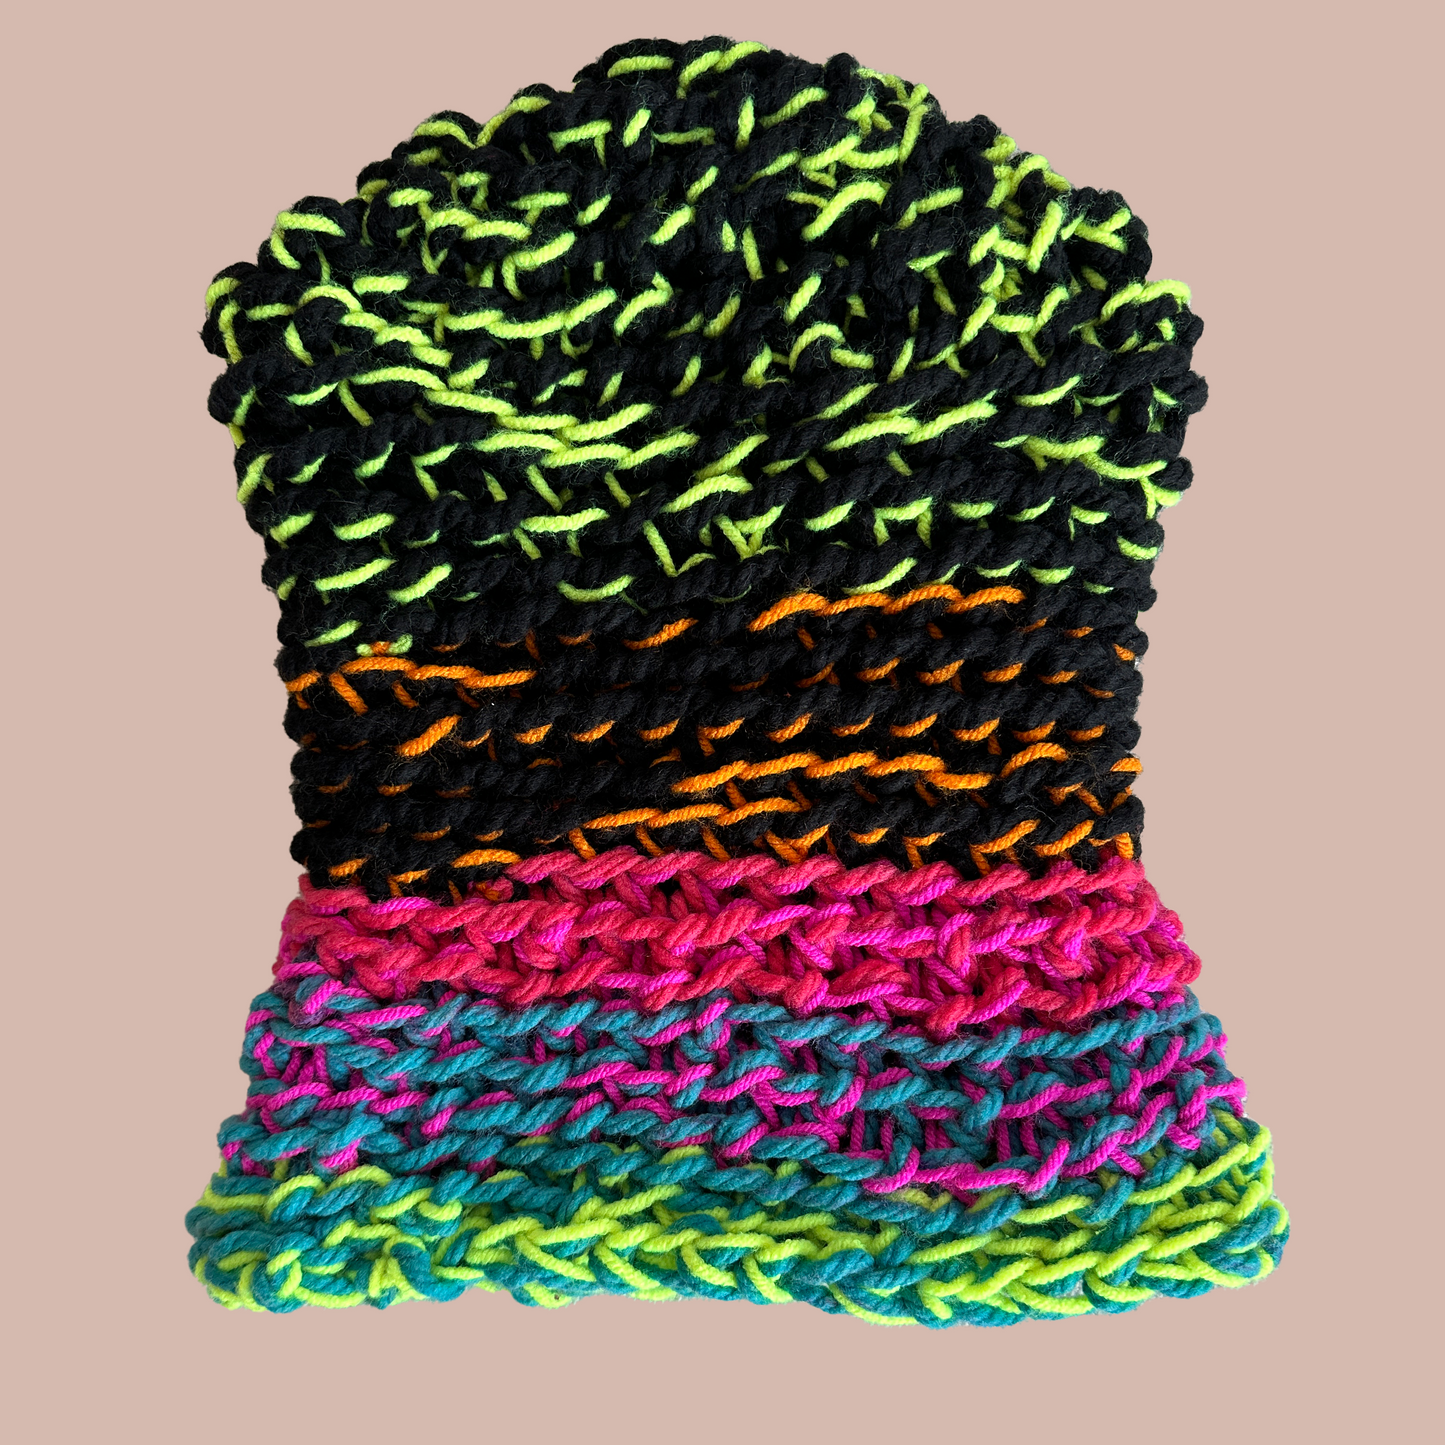 "Objects Crochet" Knitted Hat by Kristine Wong Chong